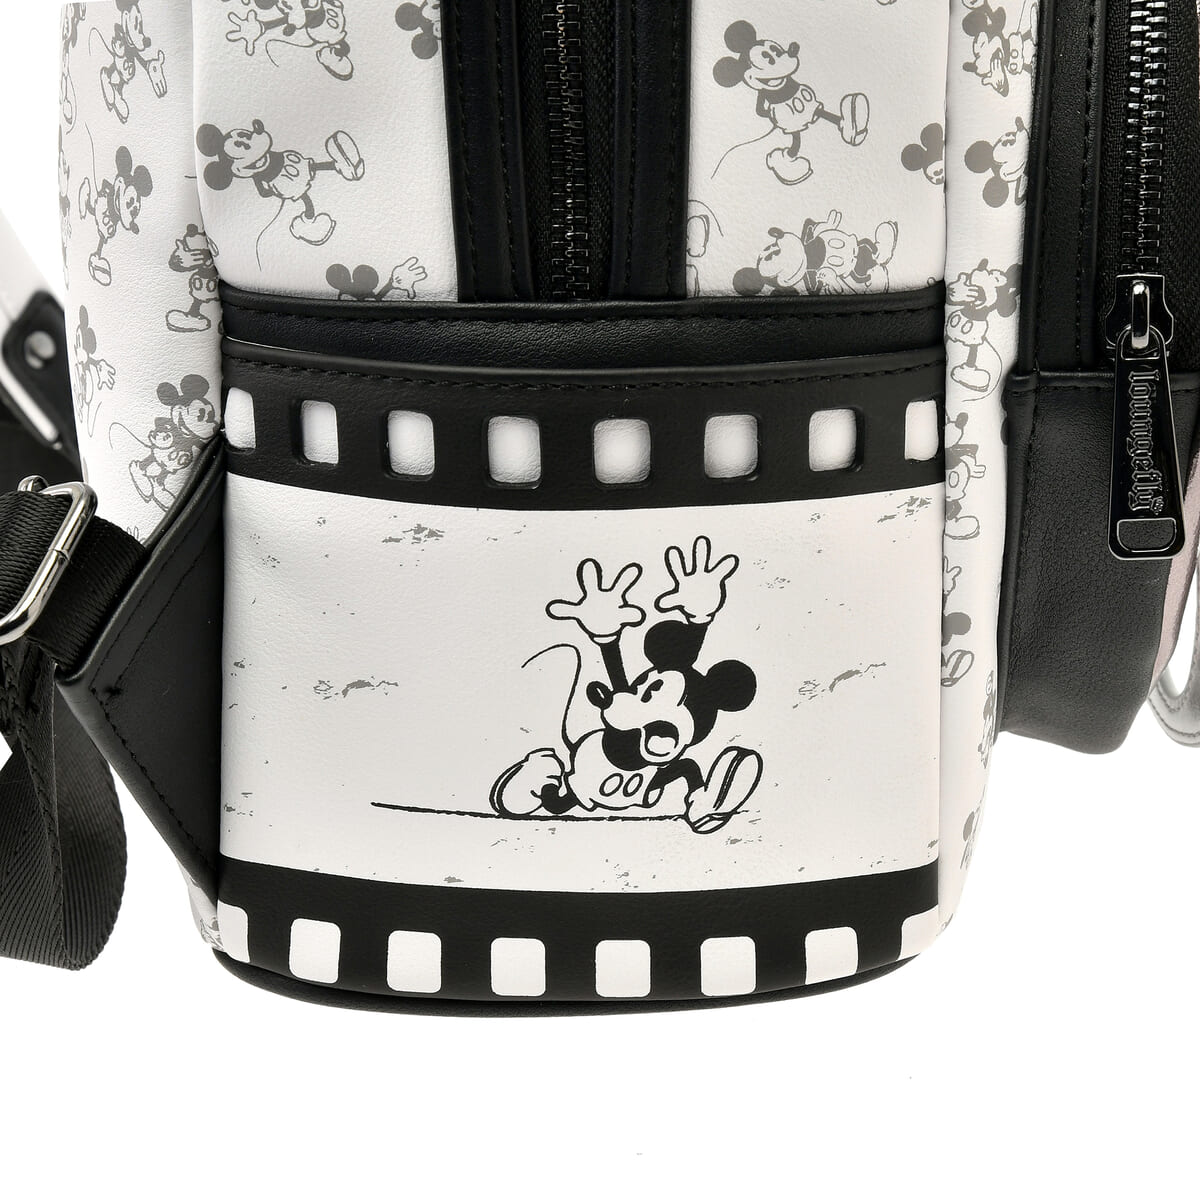 07【Loungefly】ミッキー、ピート リュックサック・バックパック 蒸気船ウィリーDisney100 Decades 20s Collection